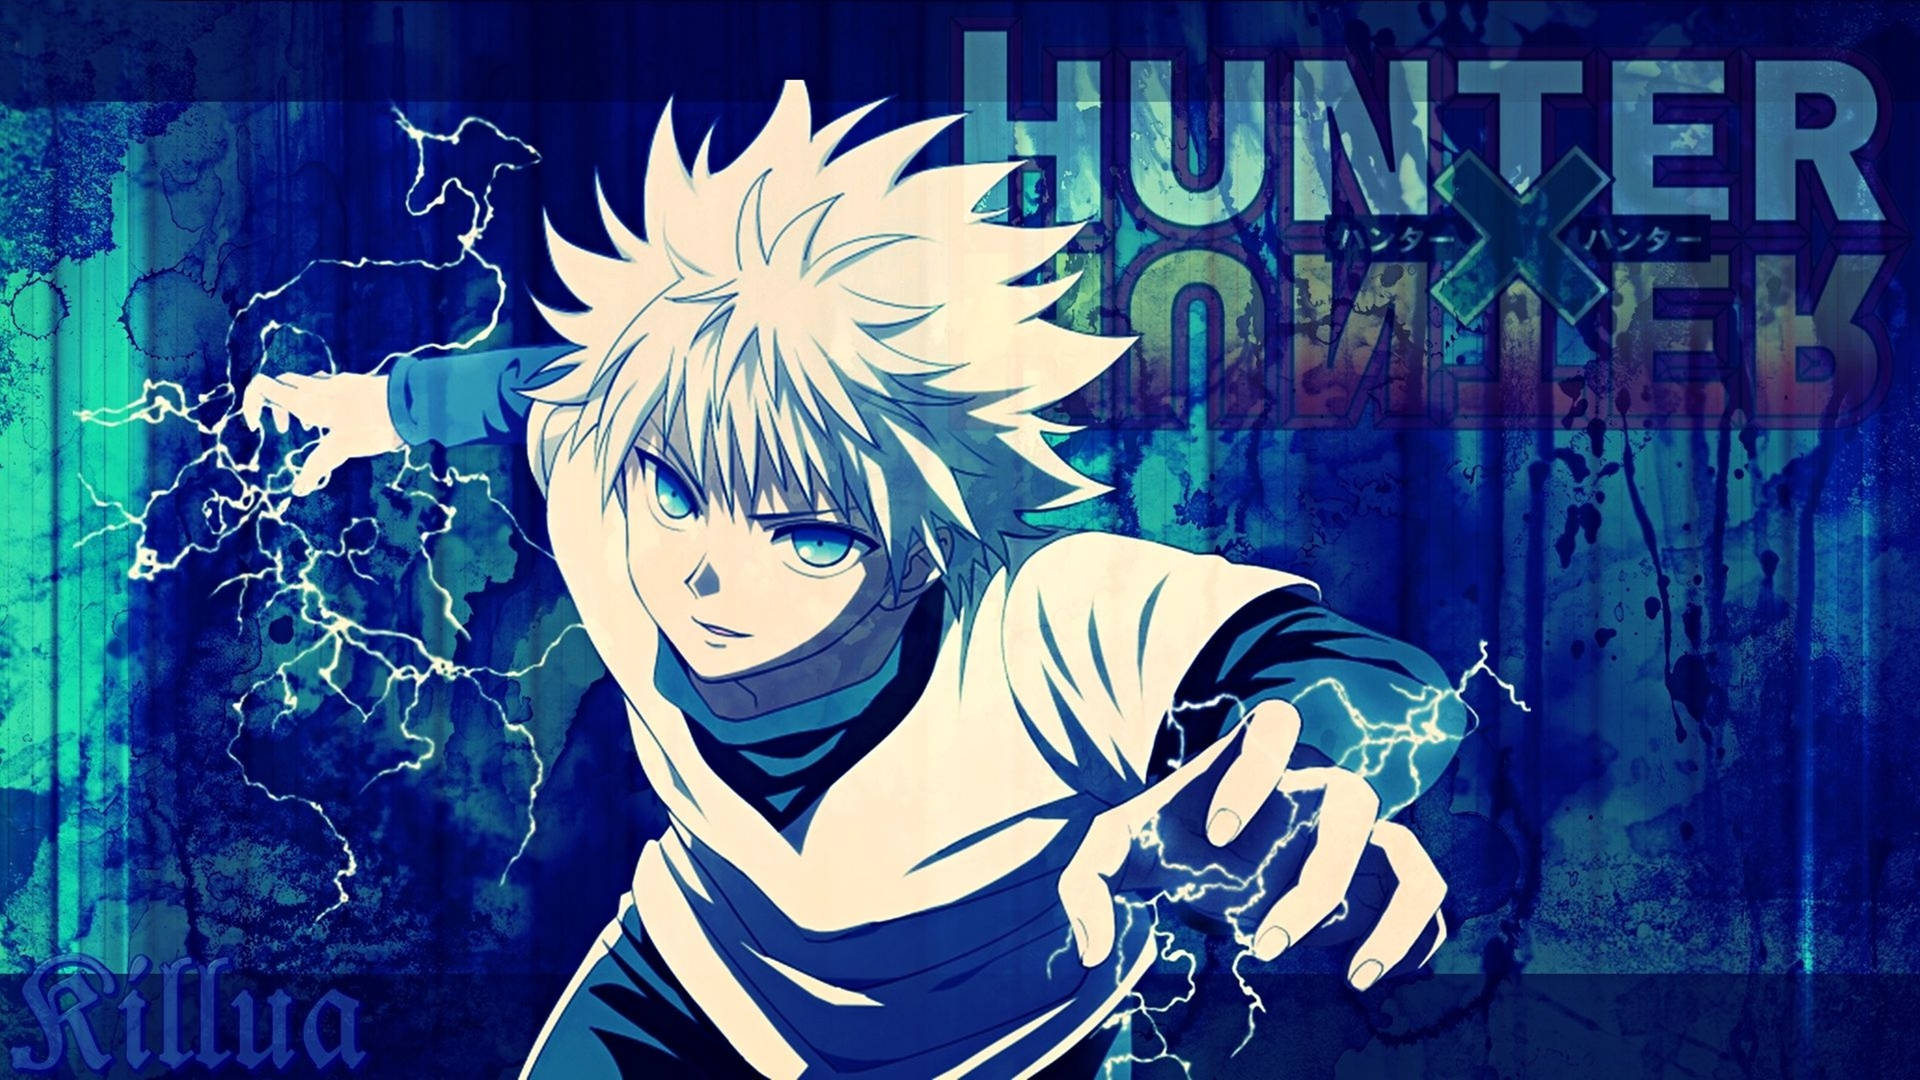 Download Follow Gon Freecss in his epic journey for a better tomorrow in  the anime classic 'Hunter x Hunter' Wallpaper